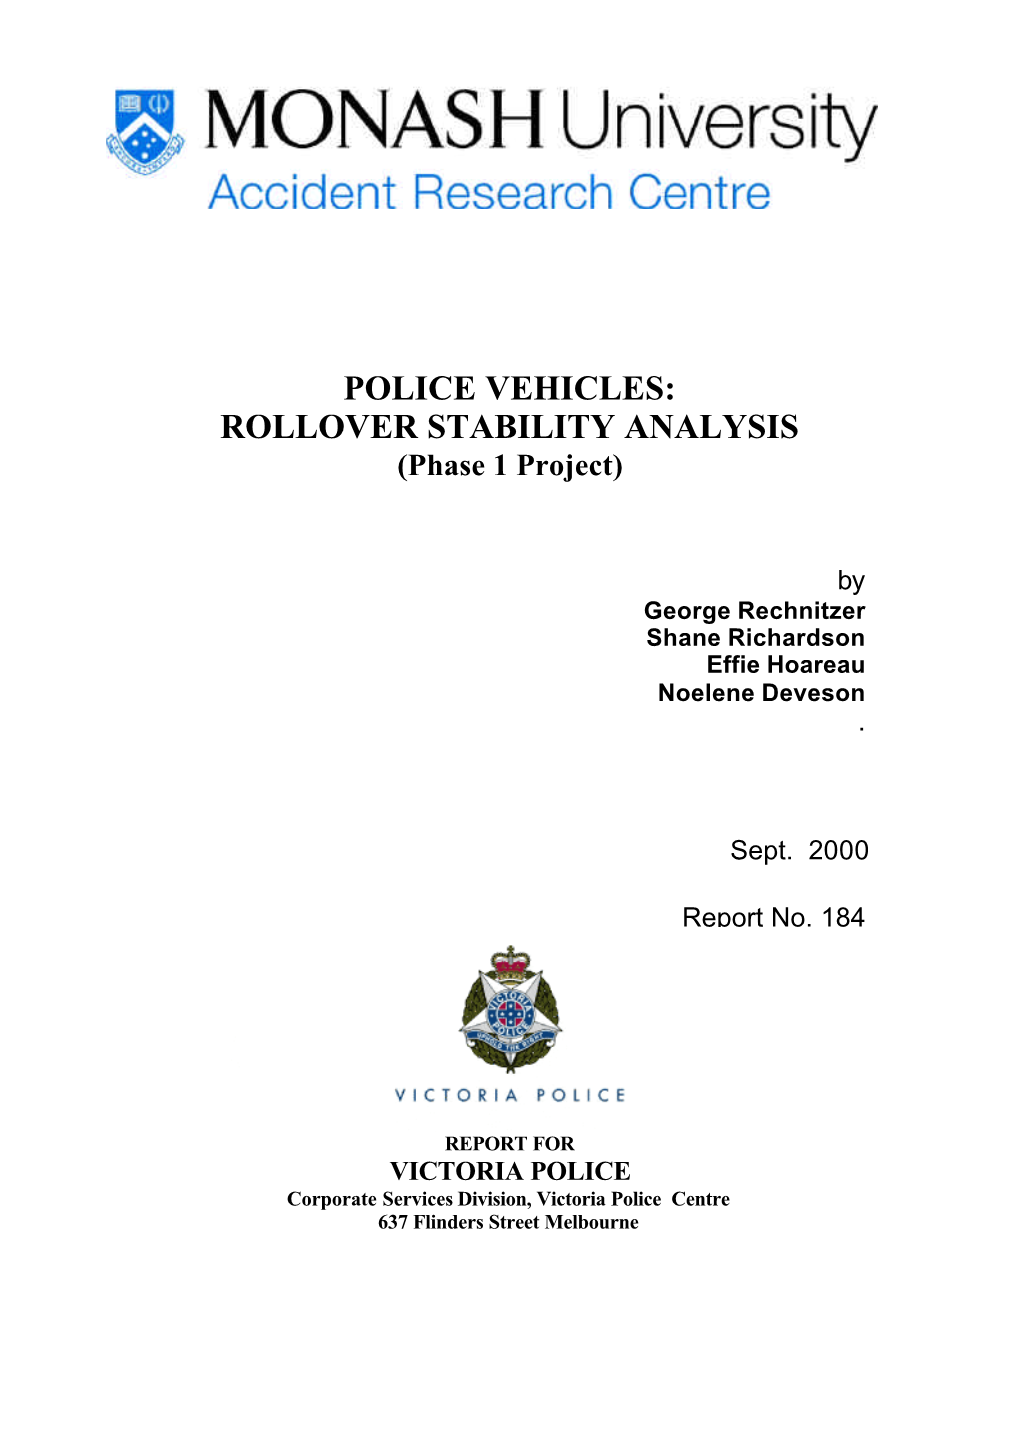 POLICE VEHICLES: ROLLOVER STABILITY ANALYSIS (Phase 1 Project)